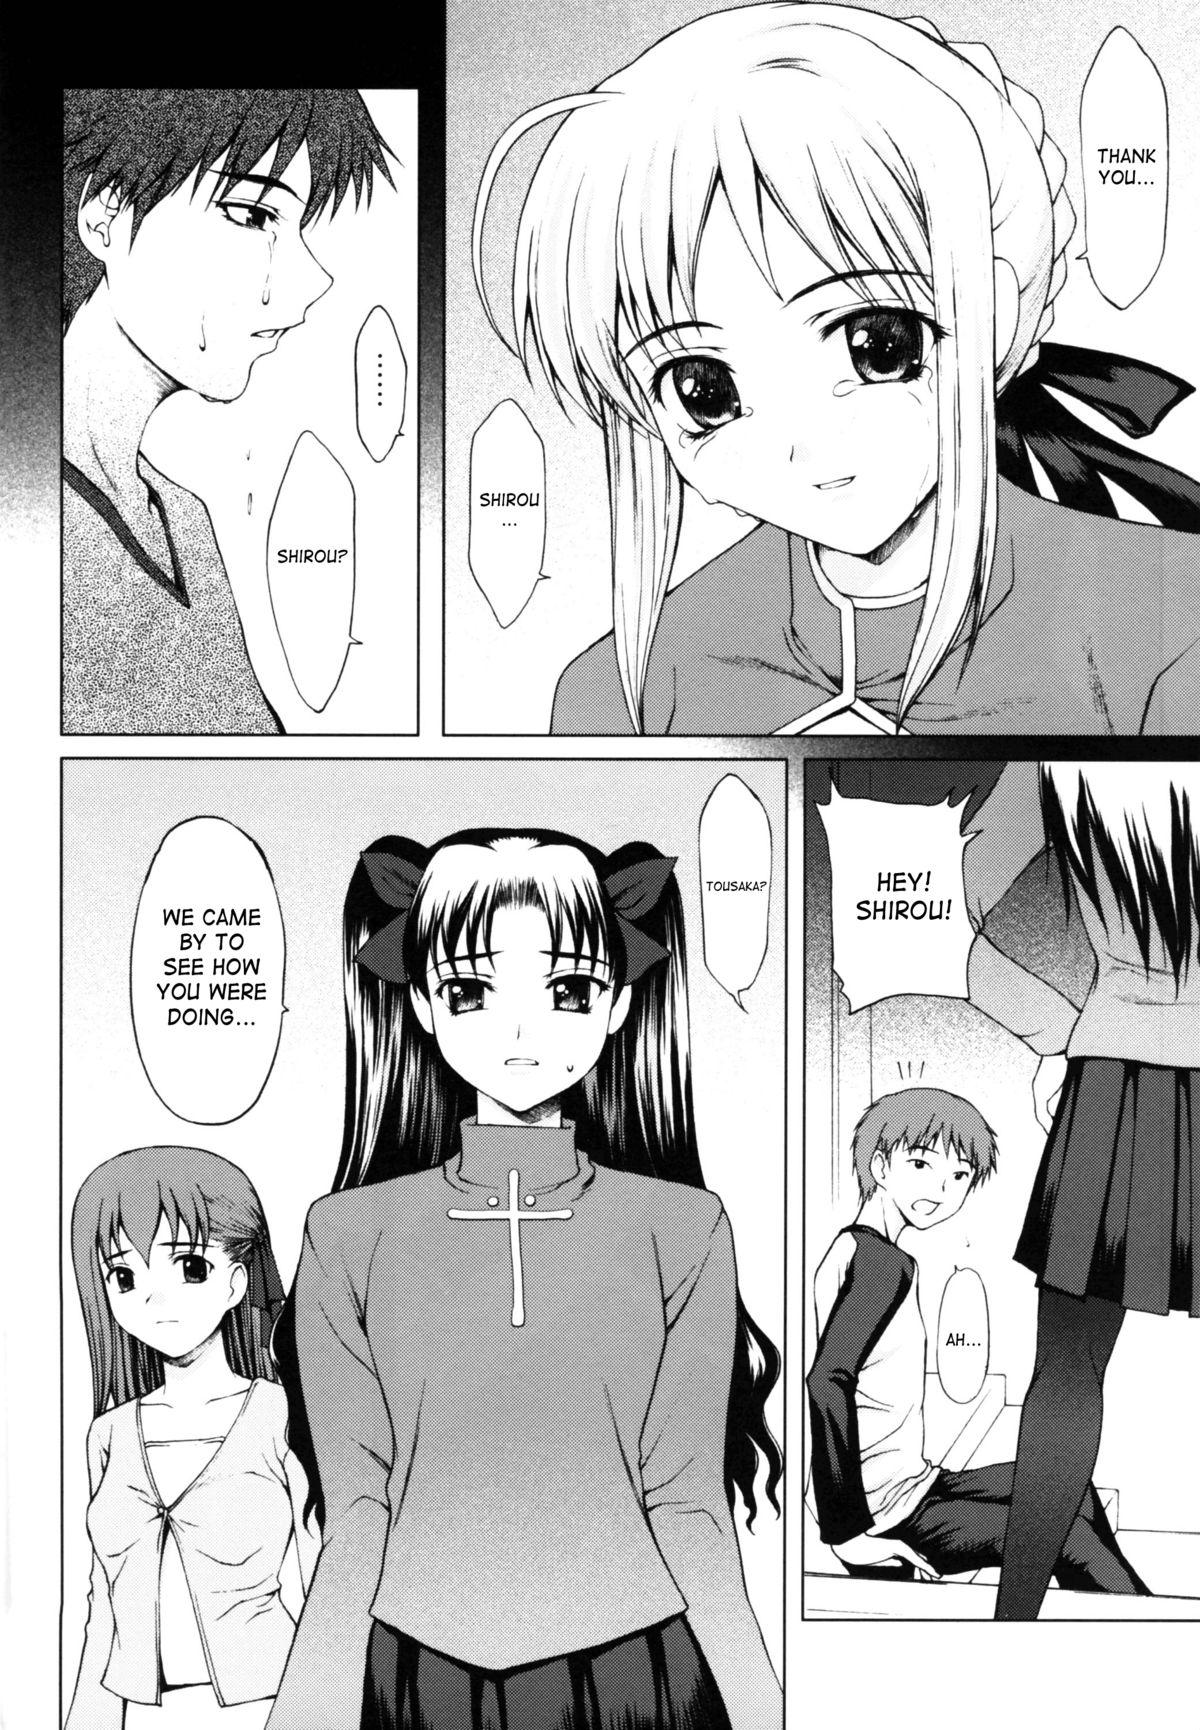 Best Blowjobs Tsukiyo no Himegoto - Fate stay night Sex Toys - Page 7